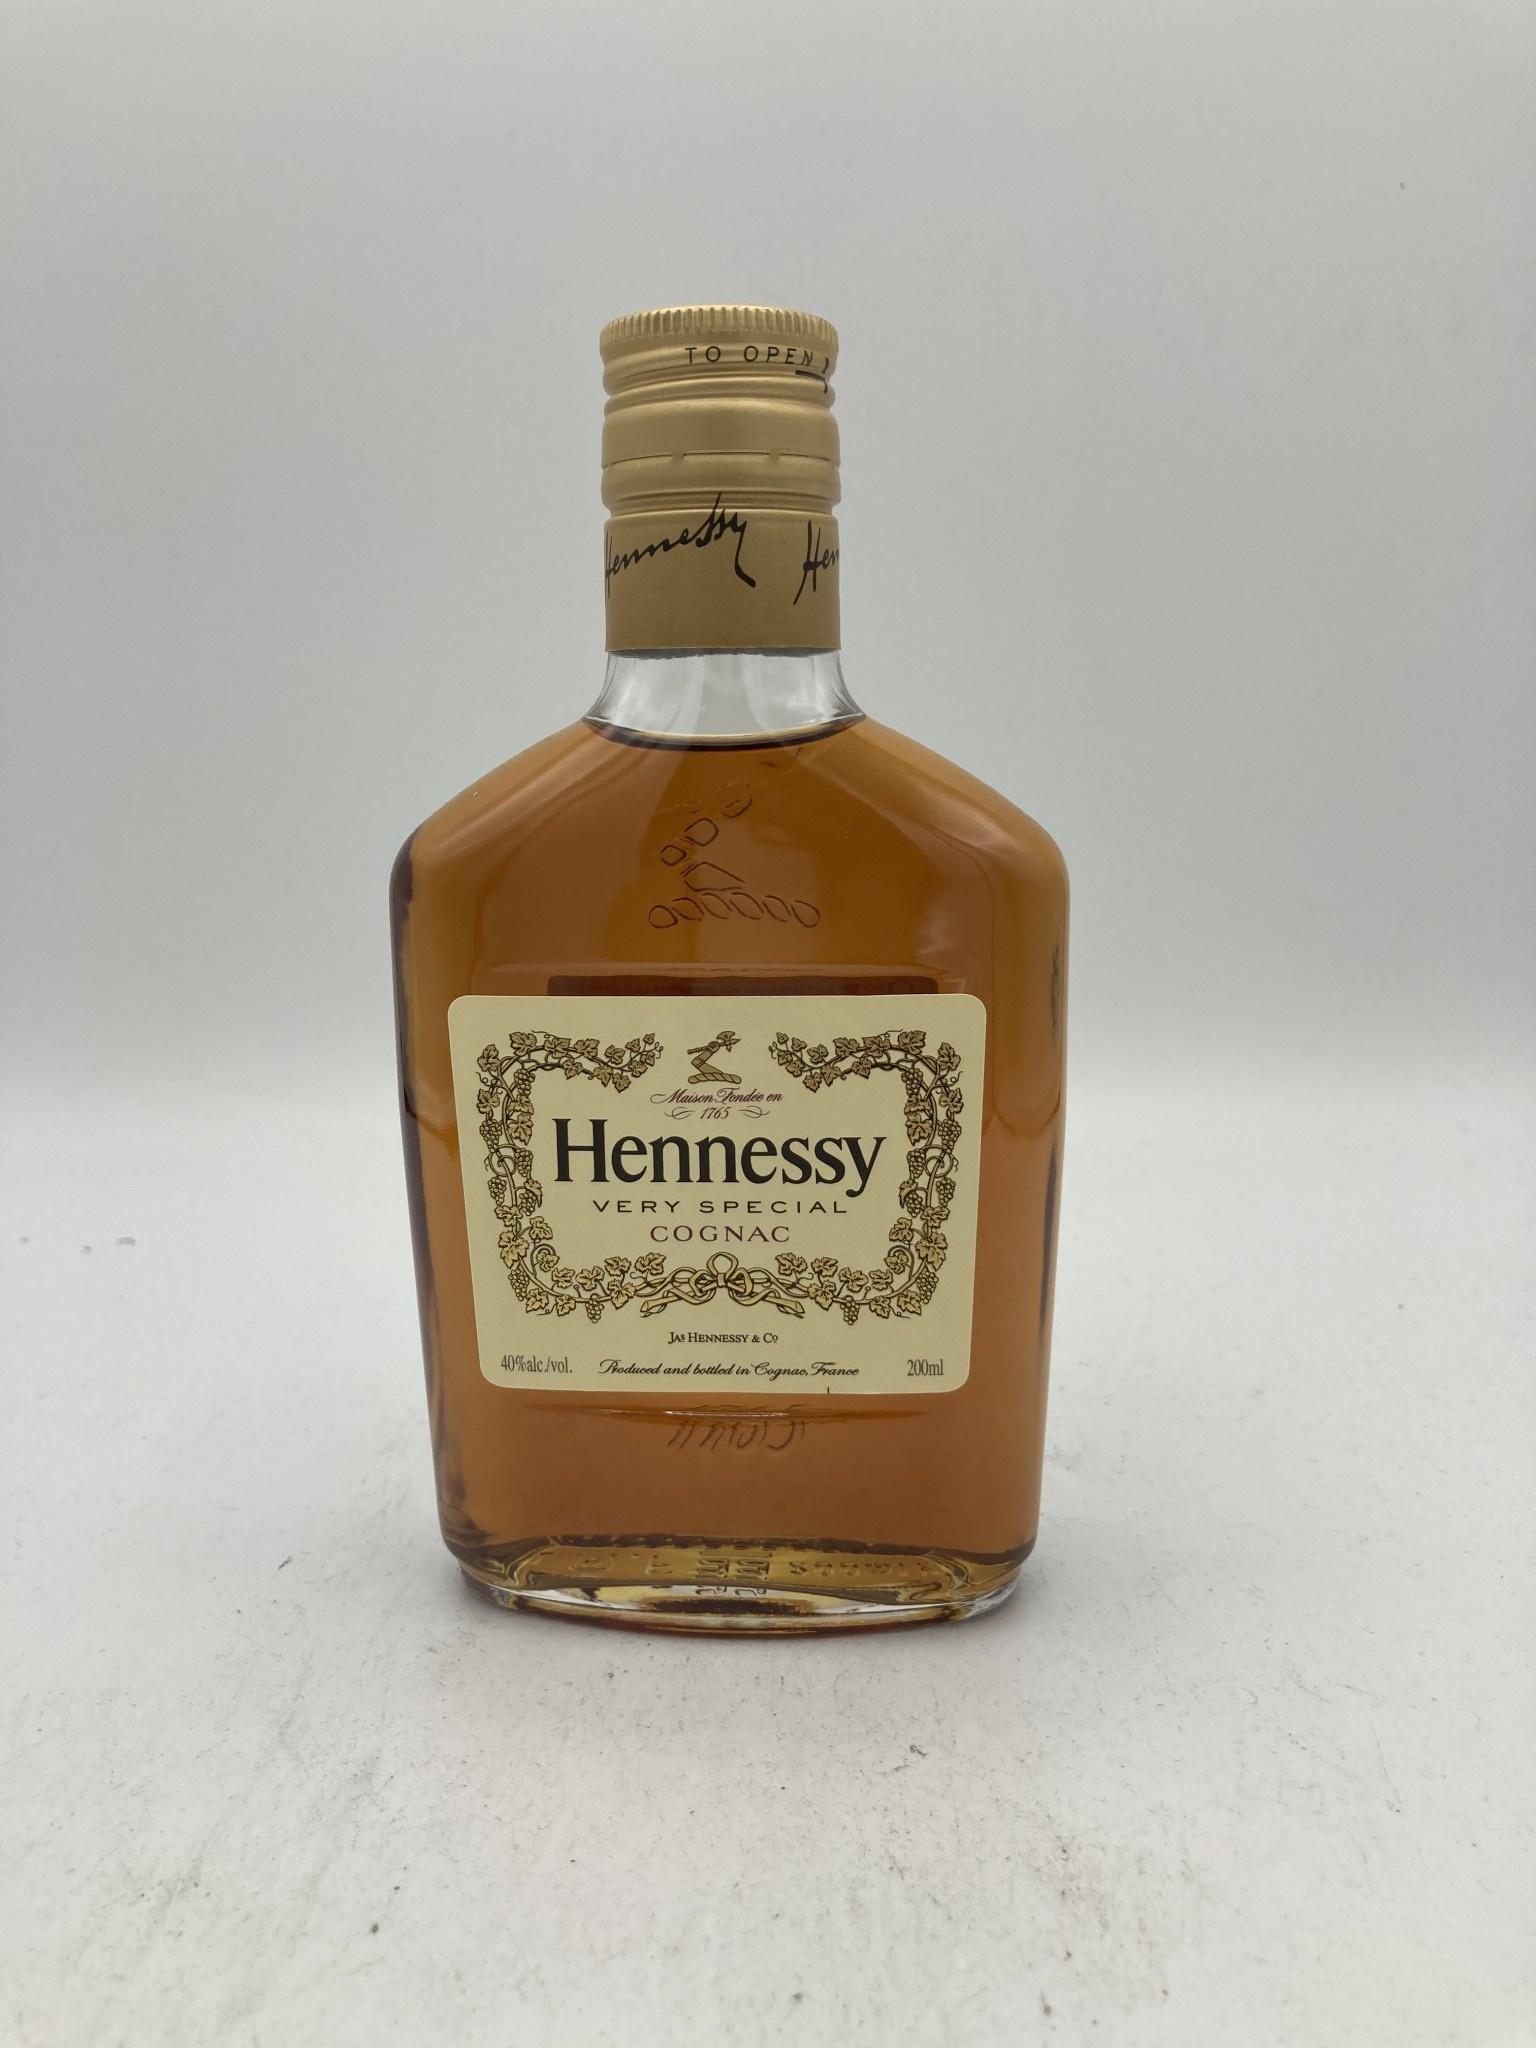 80 40% Holly 200ml - liquor cognac special Main proof abv very Hennessy